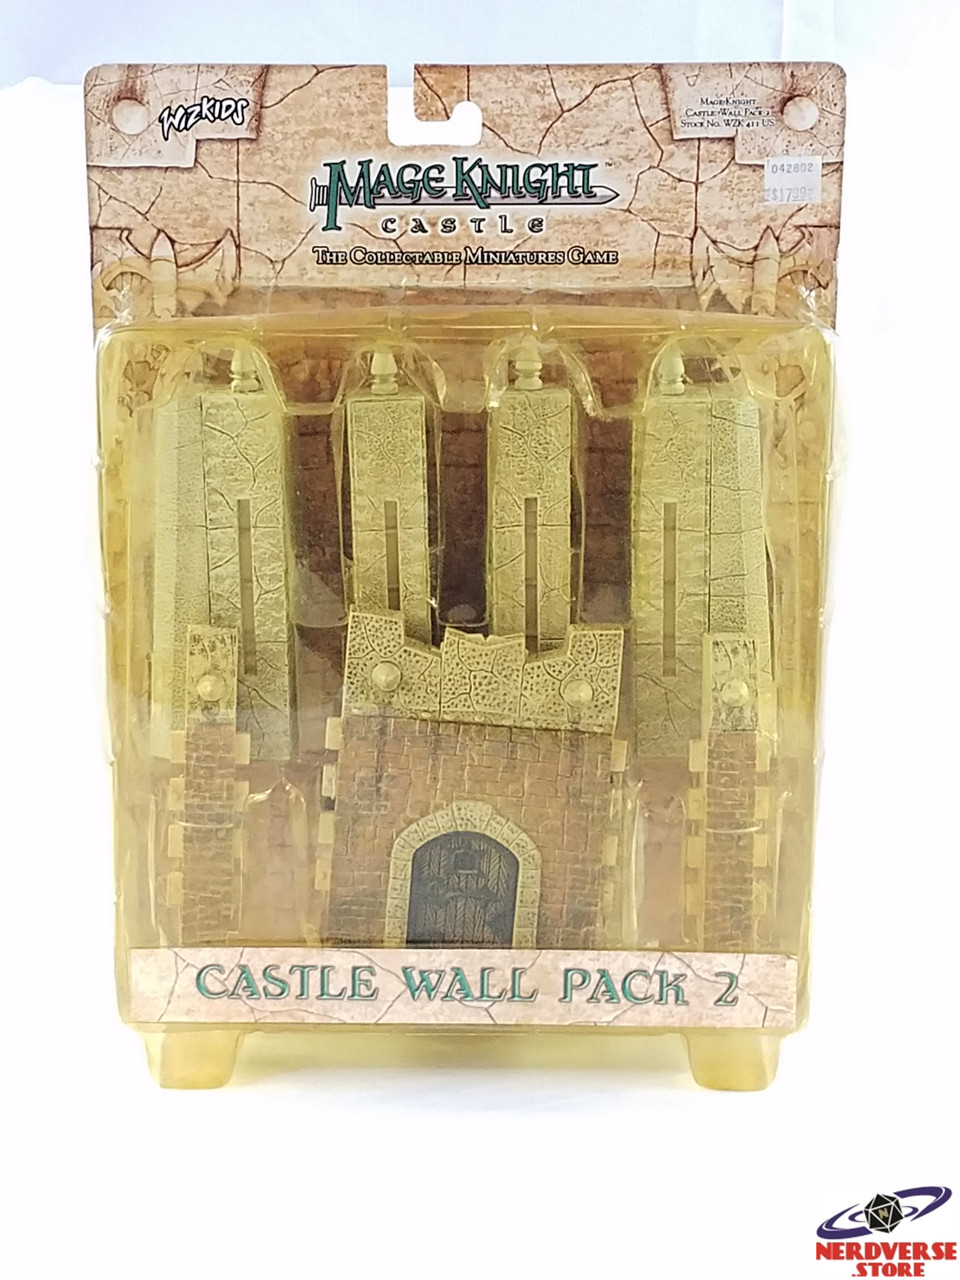 MAGE KNIGHT CASTLE WALLS PACK 2 NEW IN BOX WIZKIDS MISB